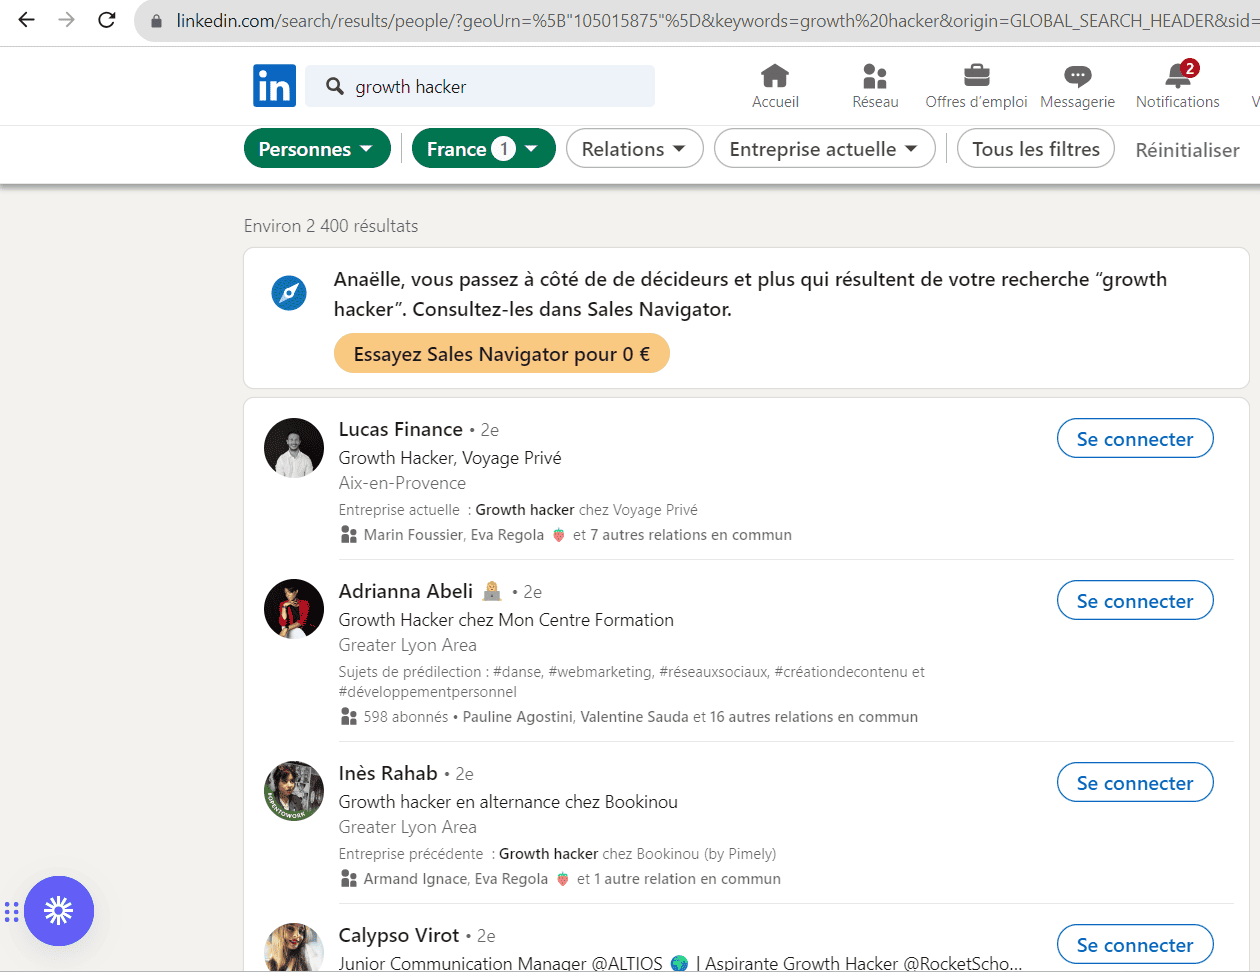 Filtered linkedIn search